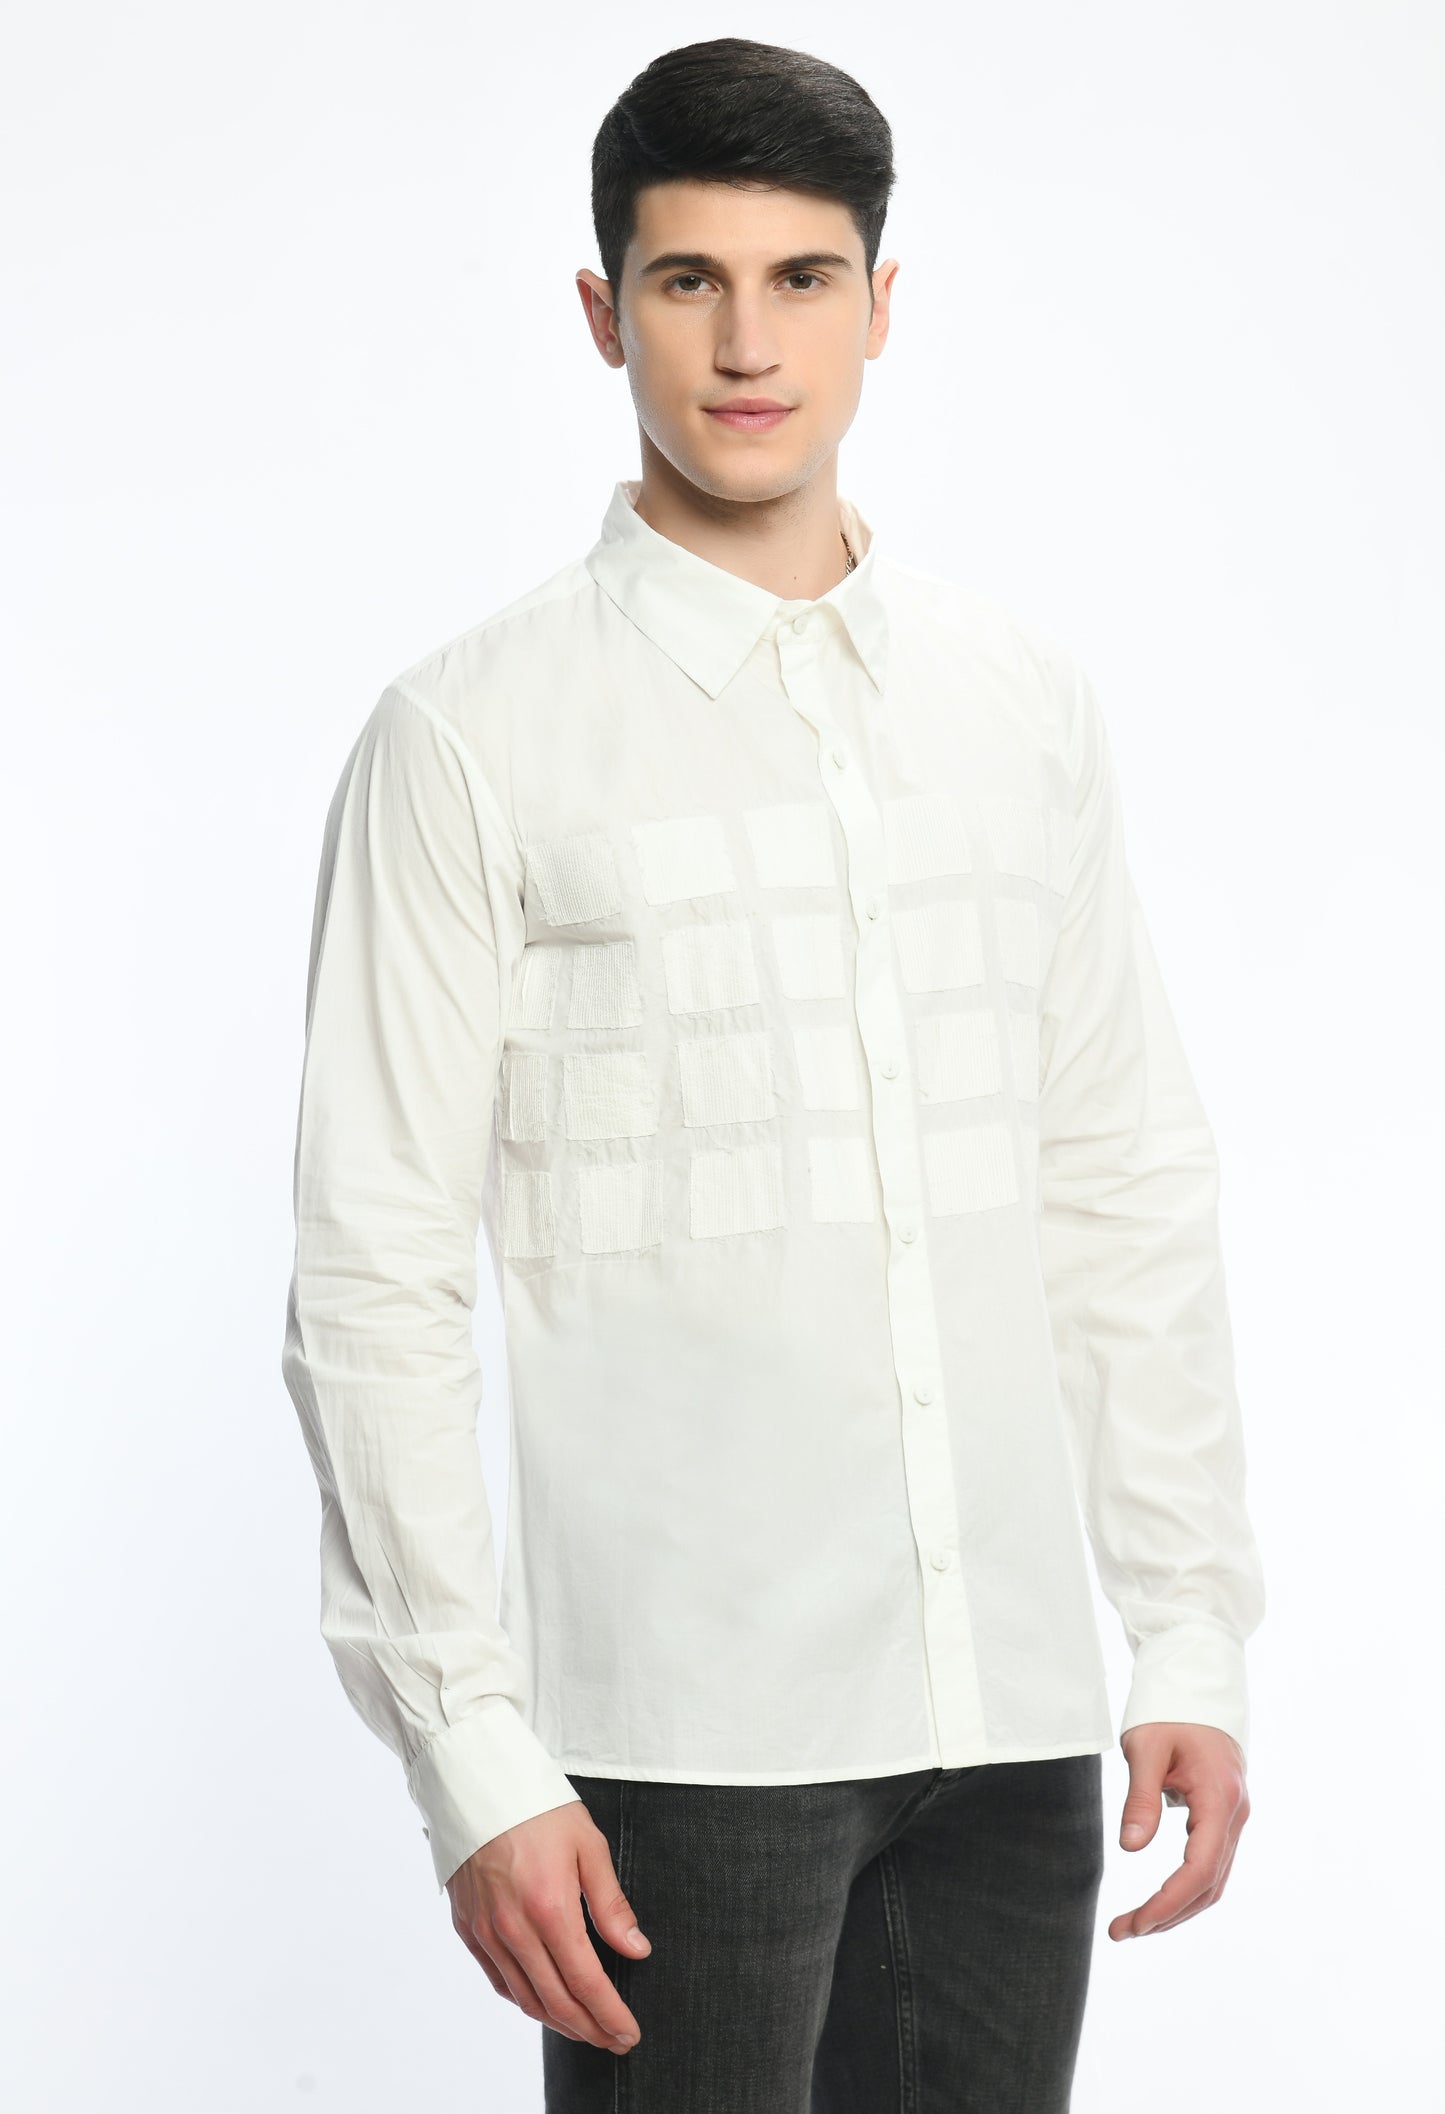 A White cotton shirt showcasing tone on tone appliqué work in form of small square cut design.